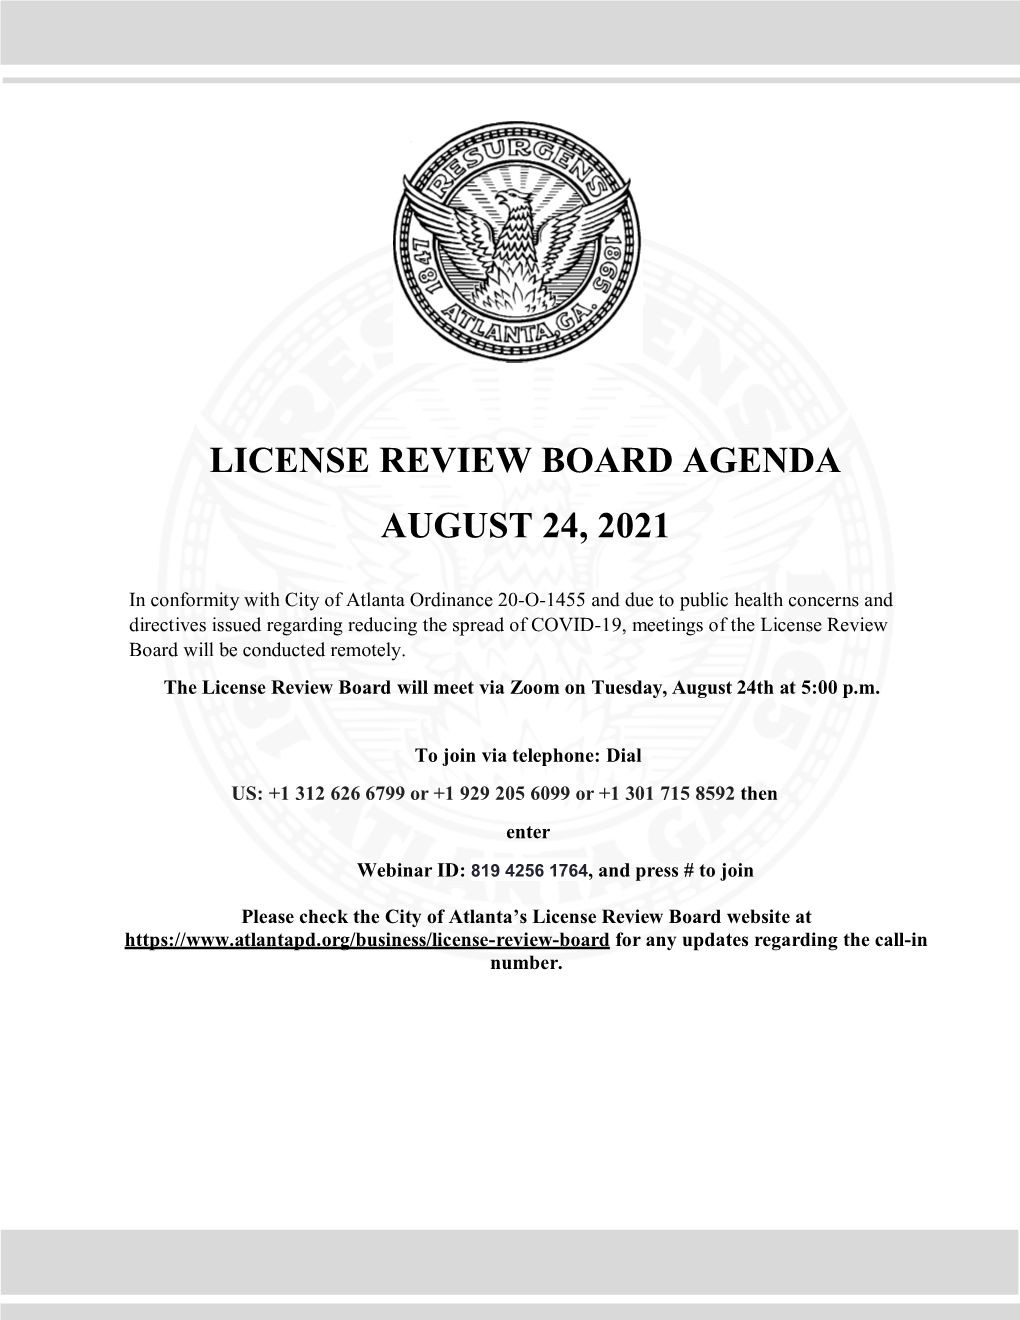 License Review Board Agenda August 24, 2021